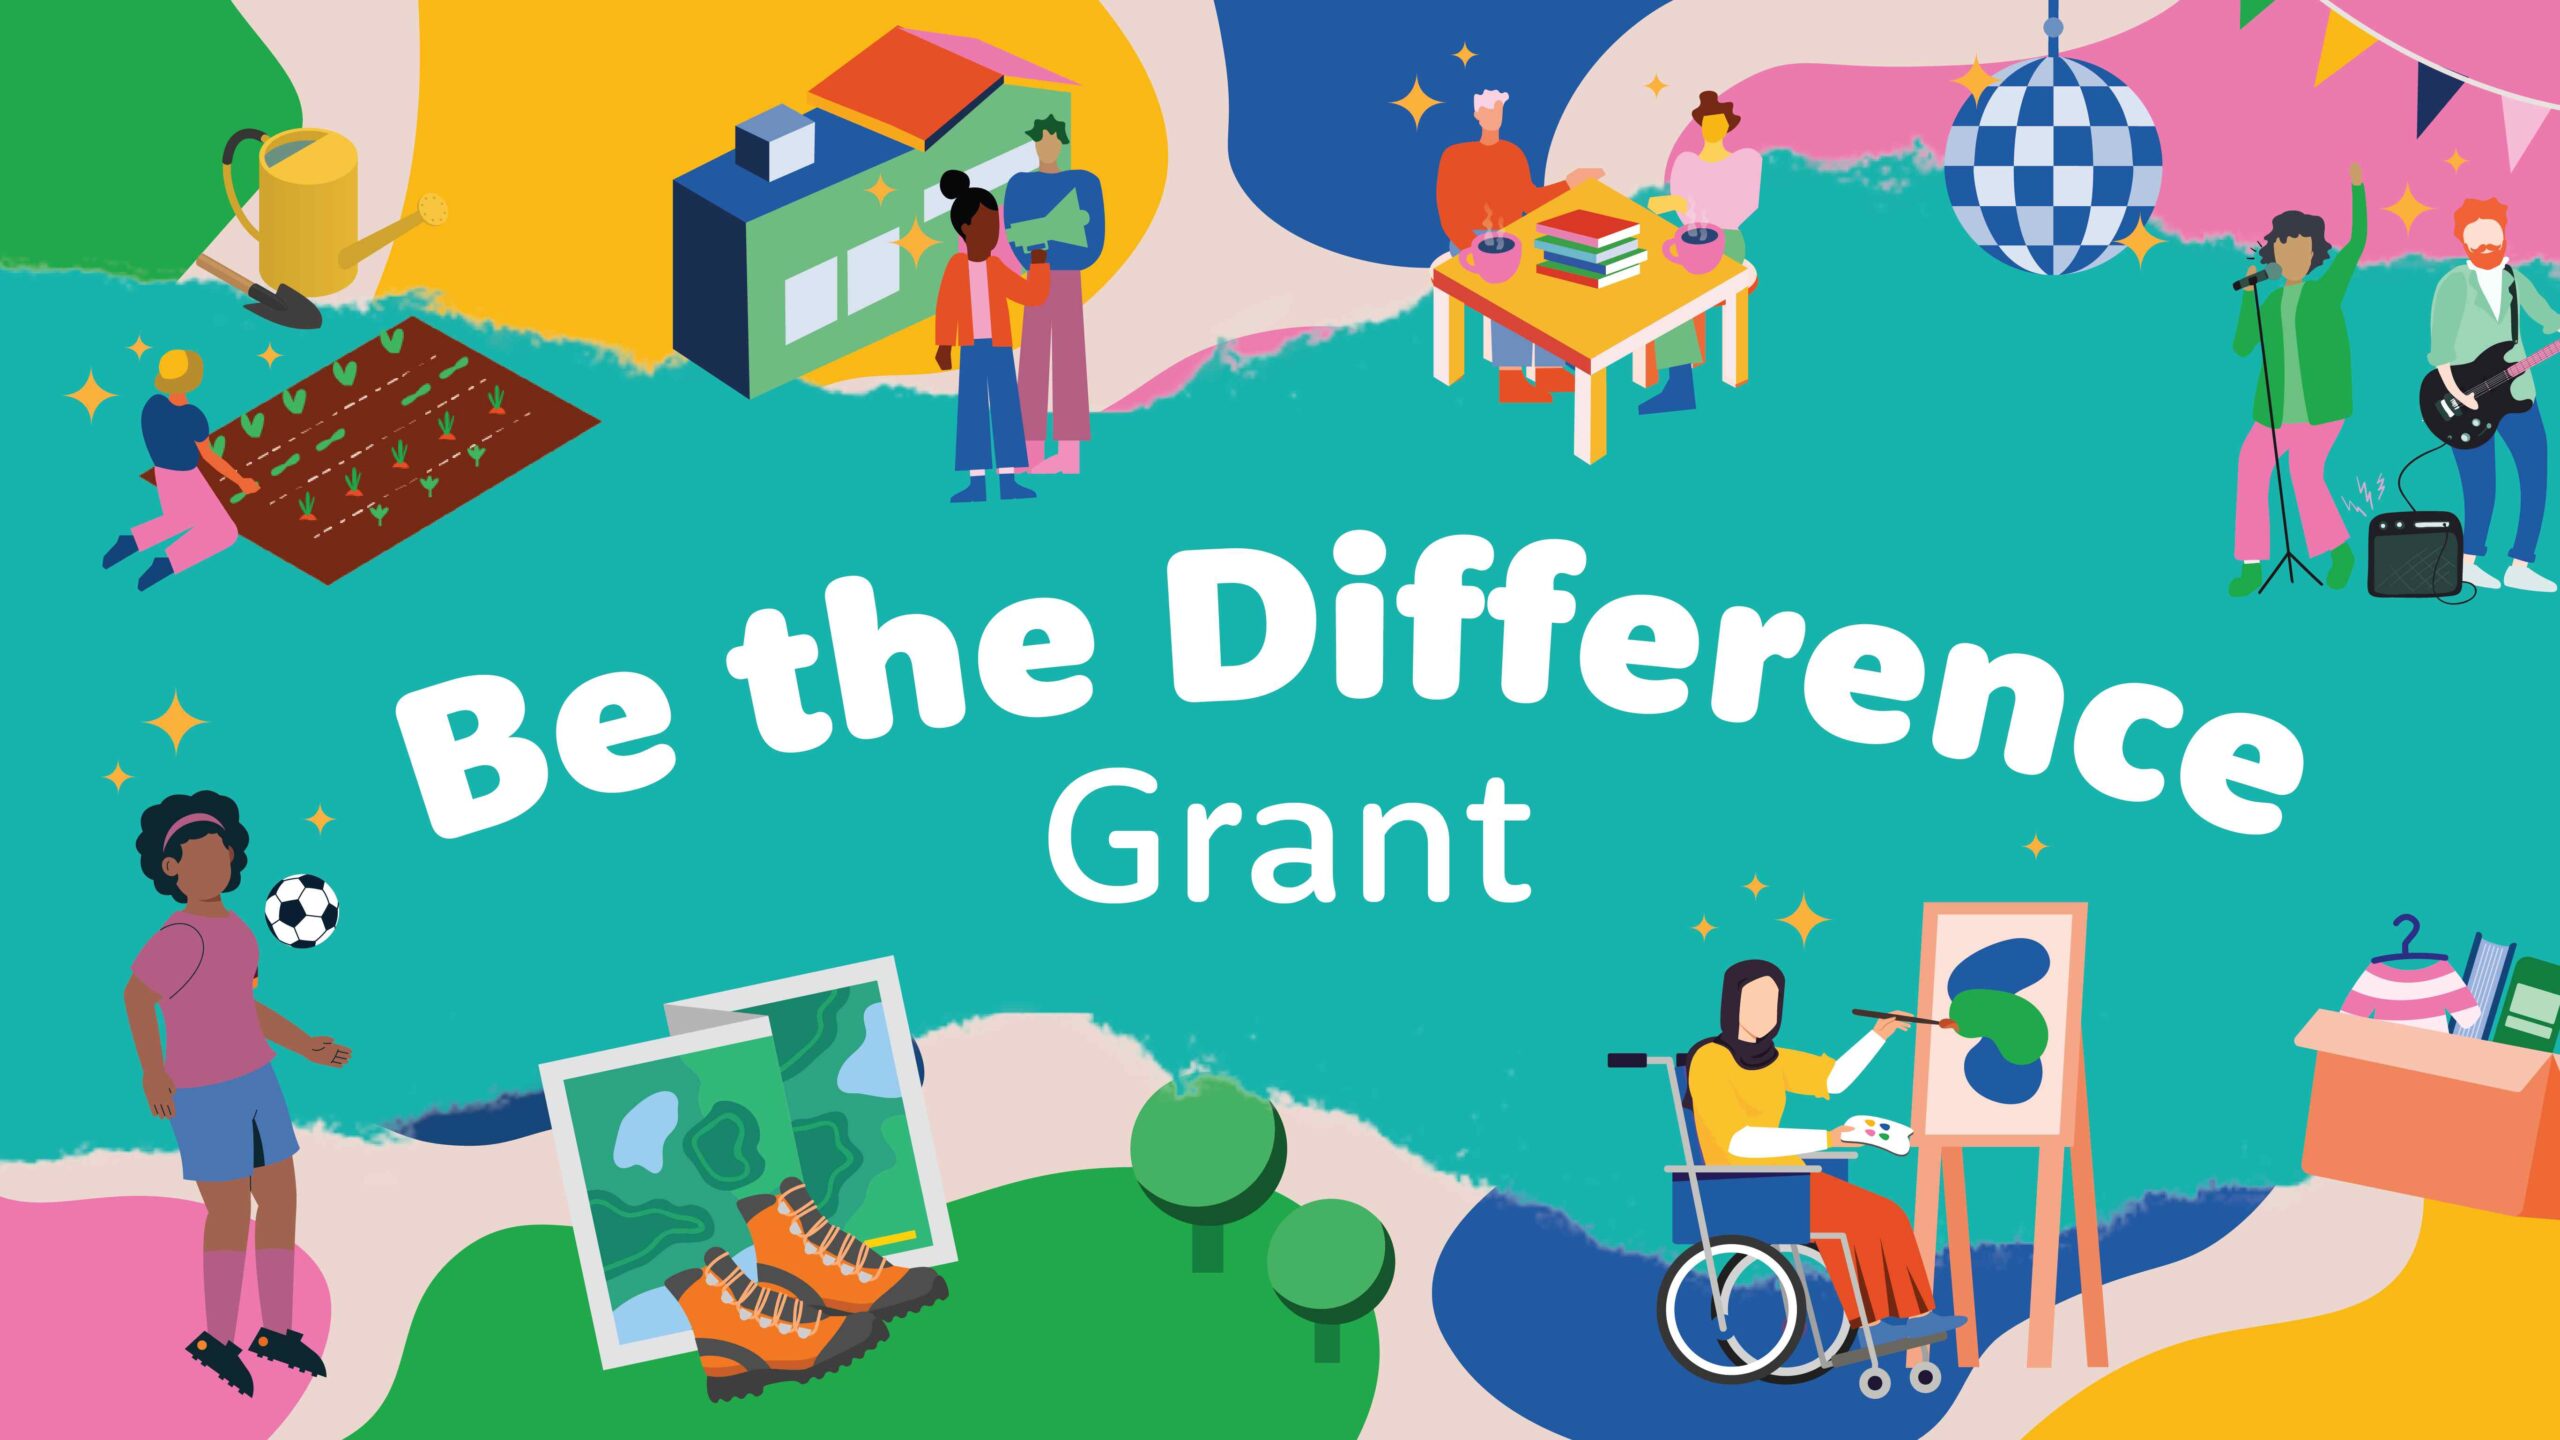 Our Be the Difference Grants are Open!